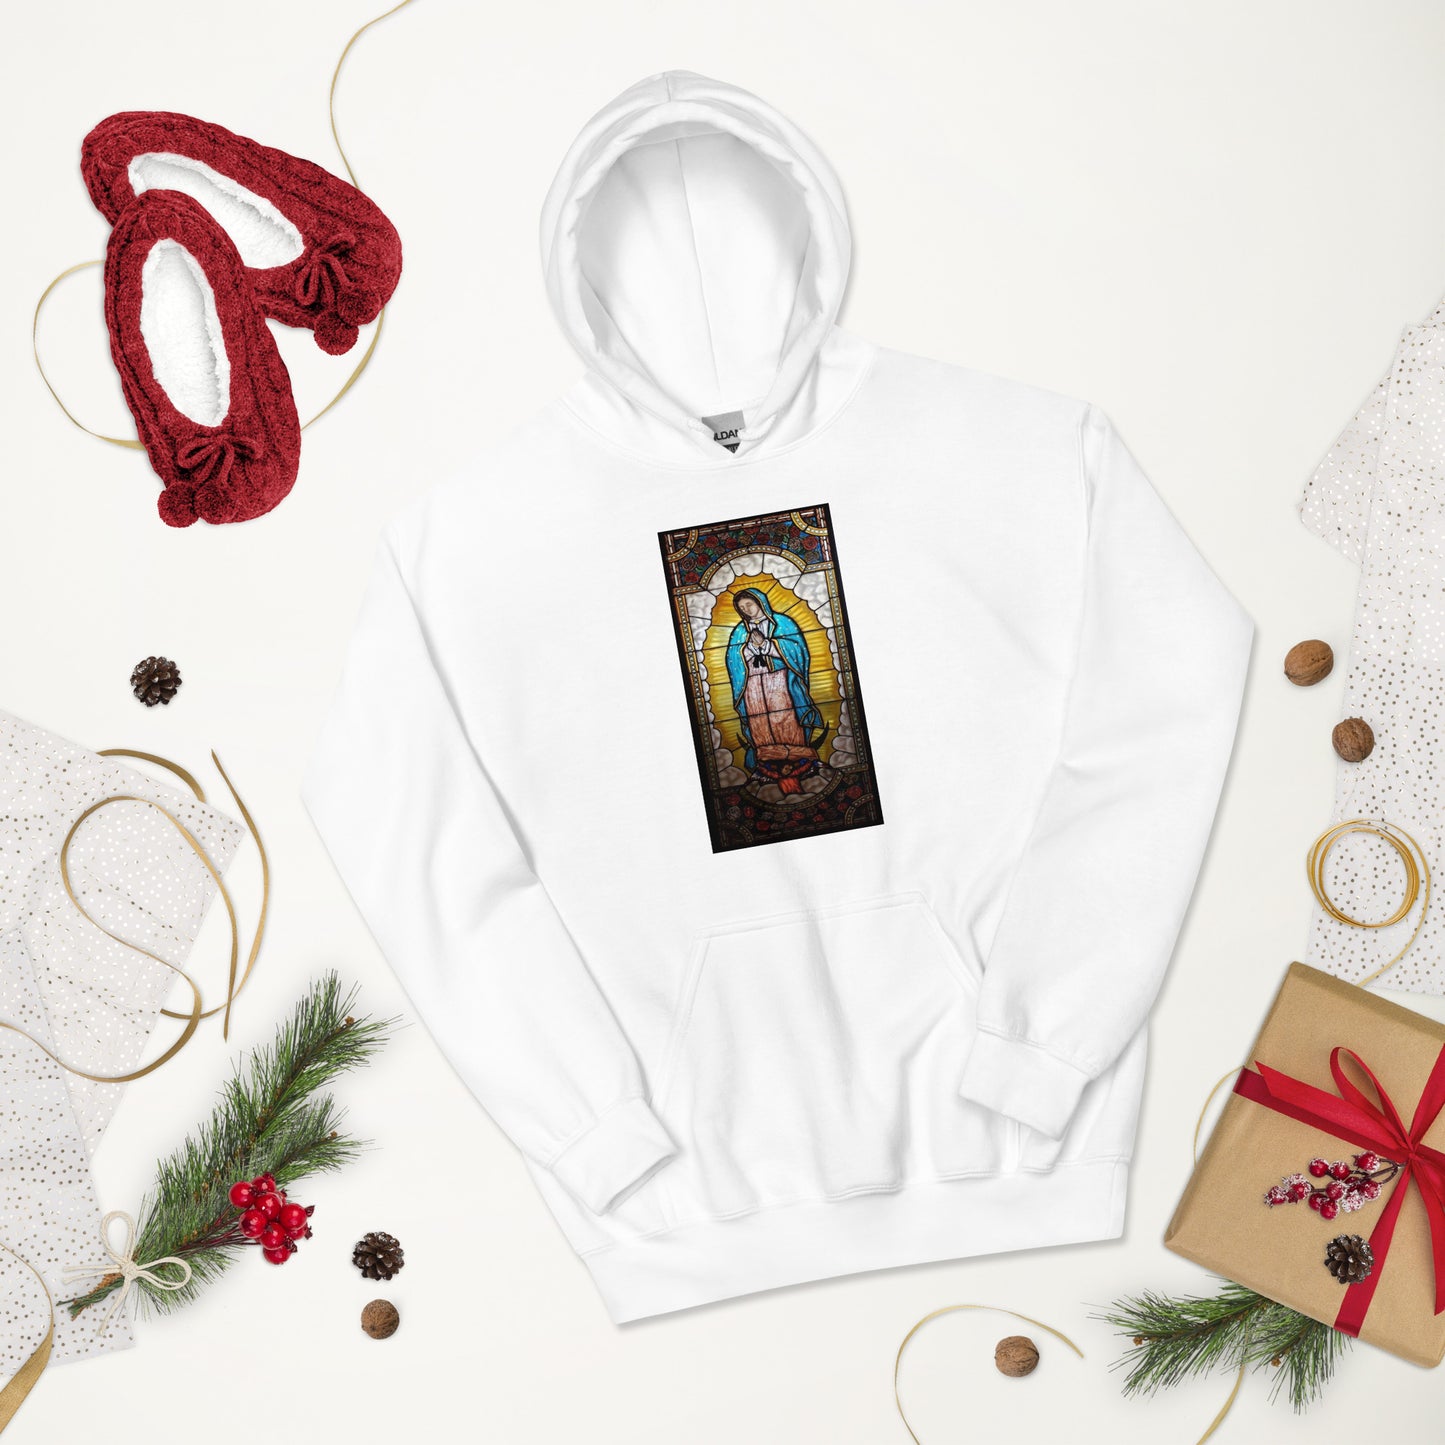 Our Lady of Guadalupe Hoodie